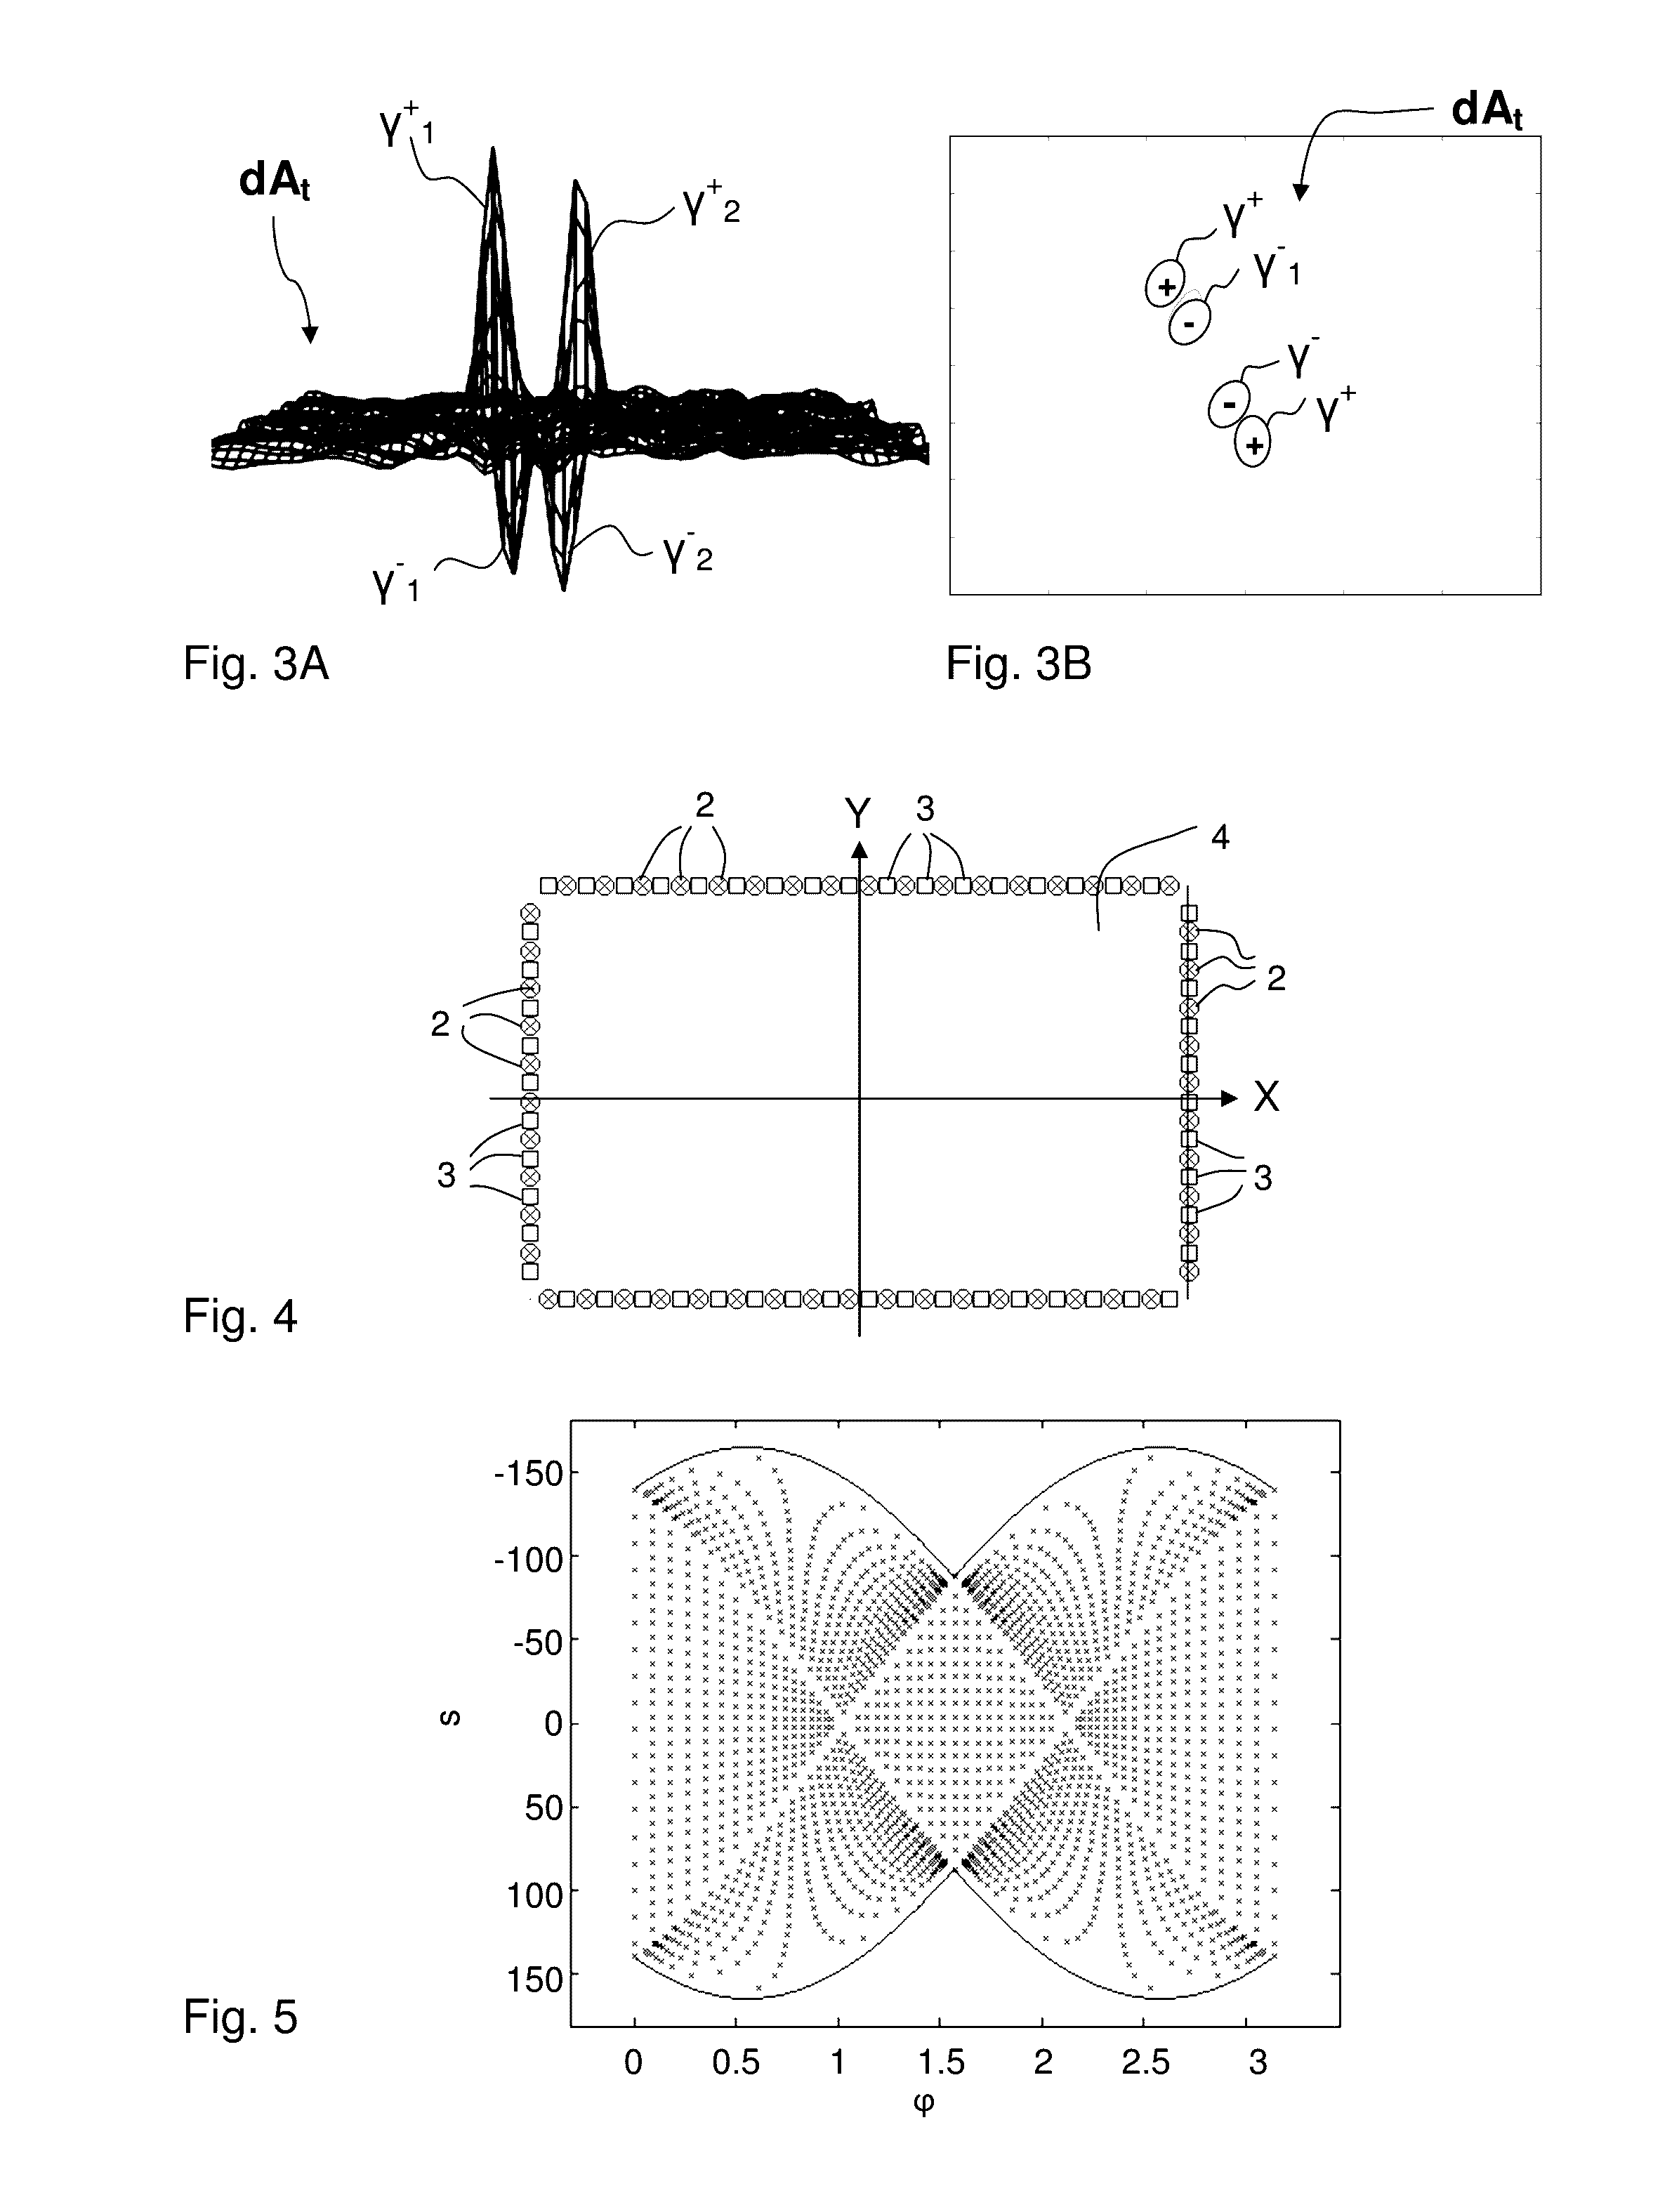 Performance monitoring and correction in a touch-sensitive apparatus